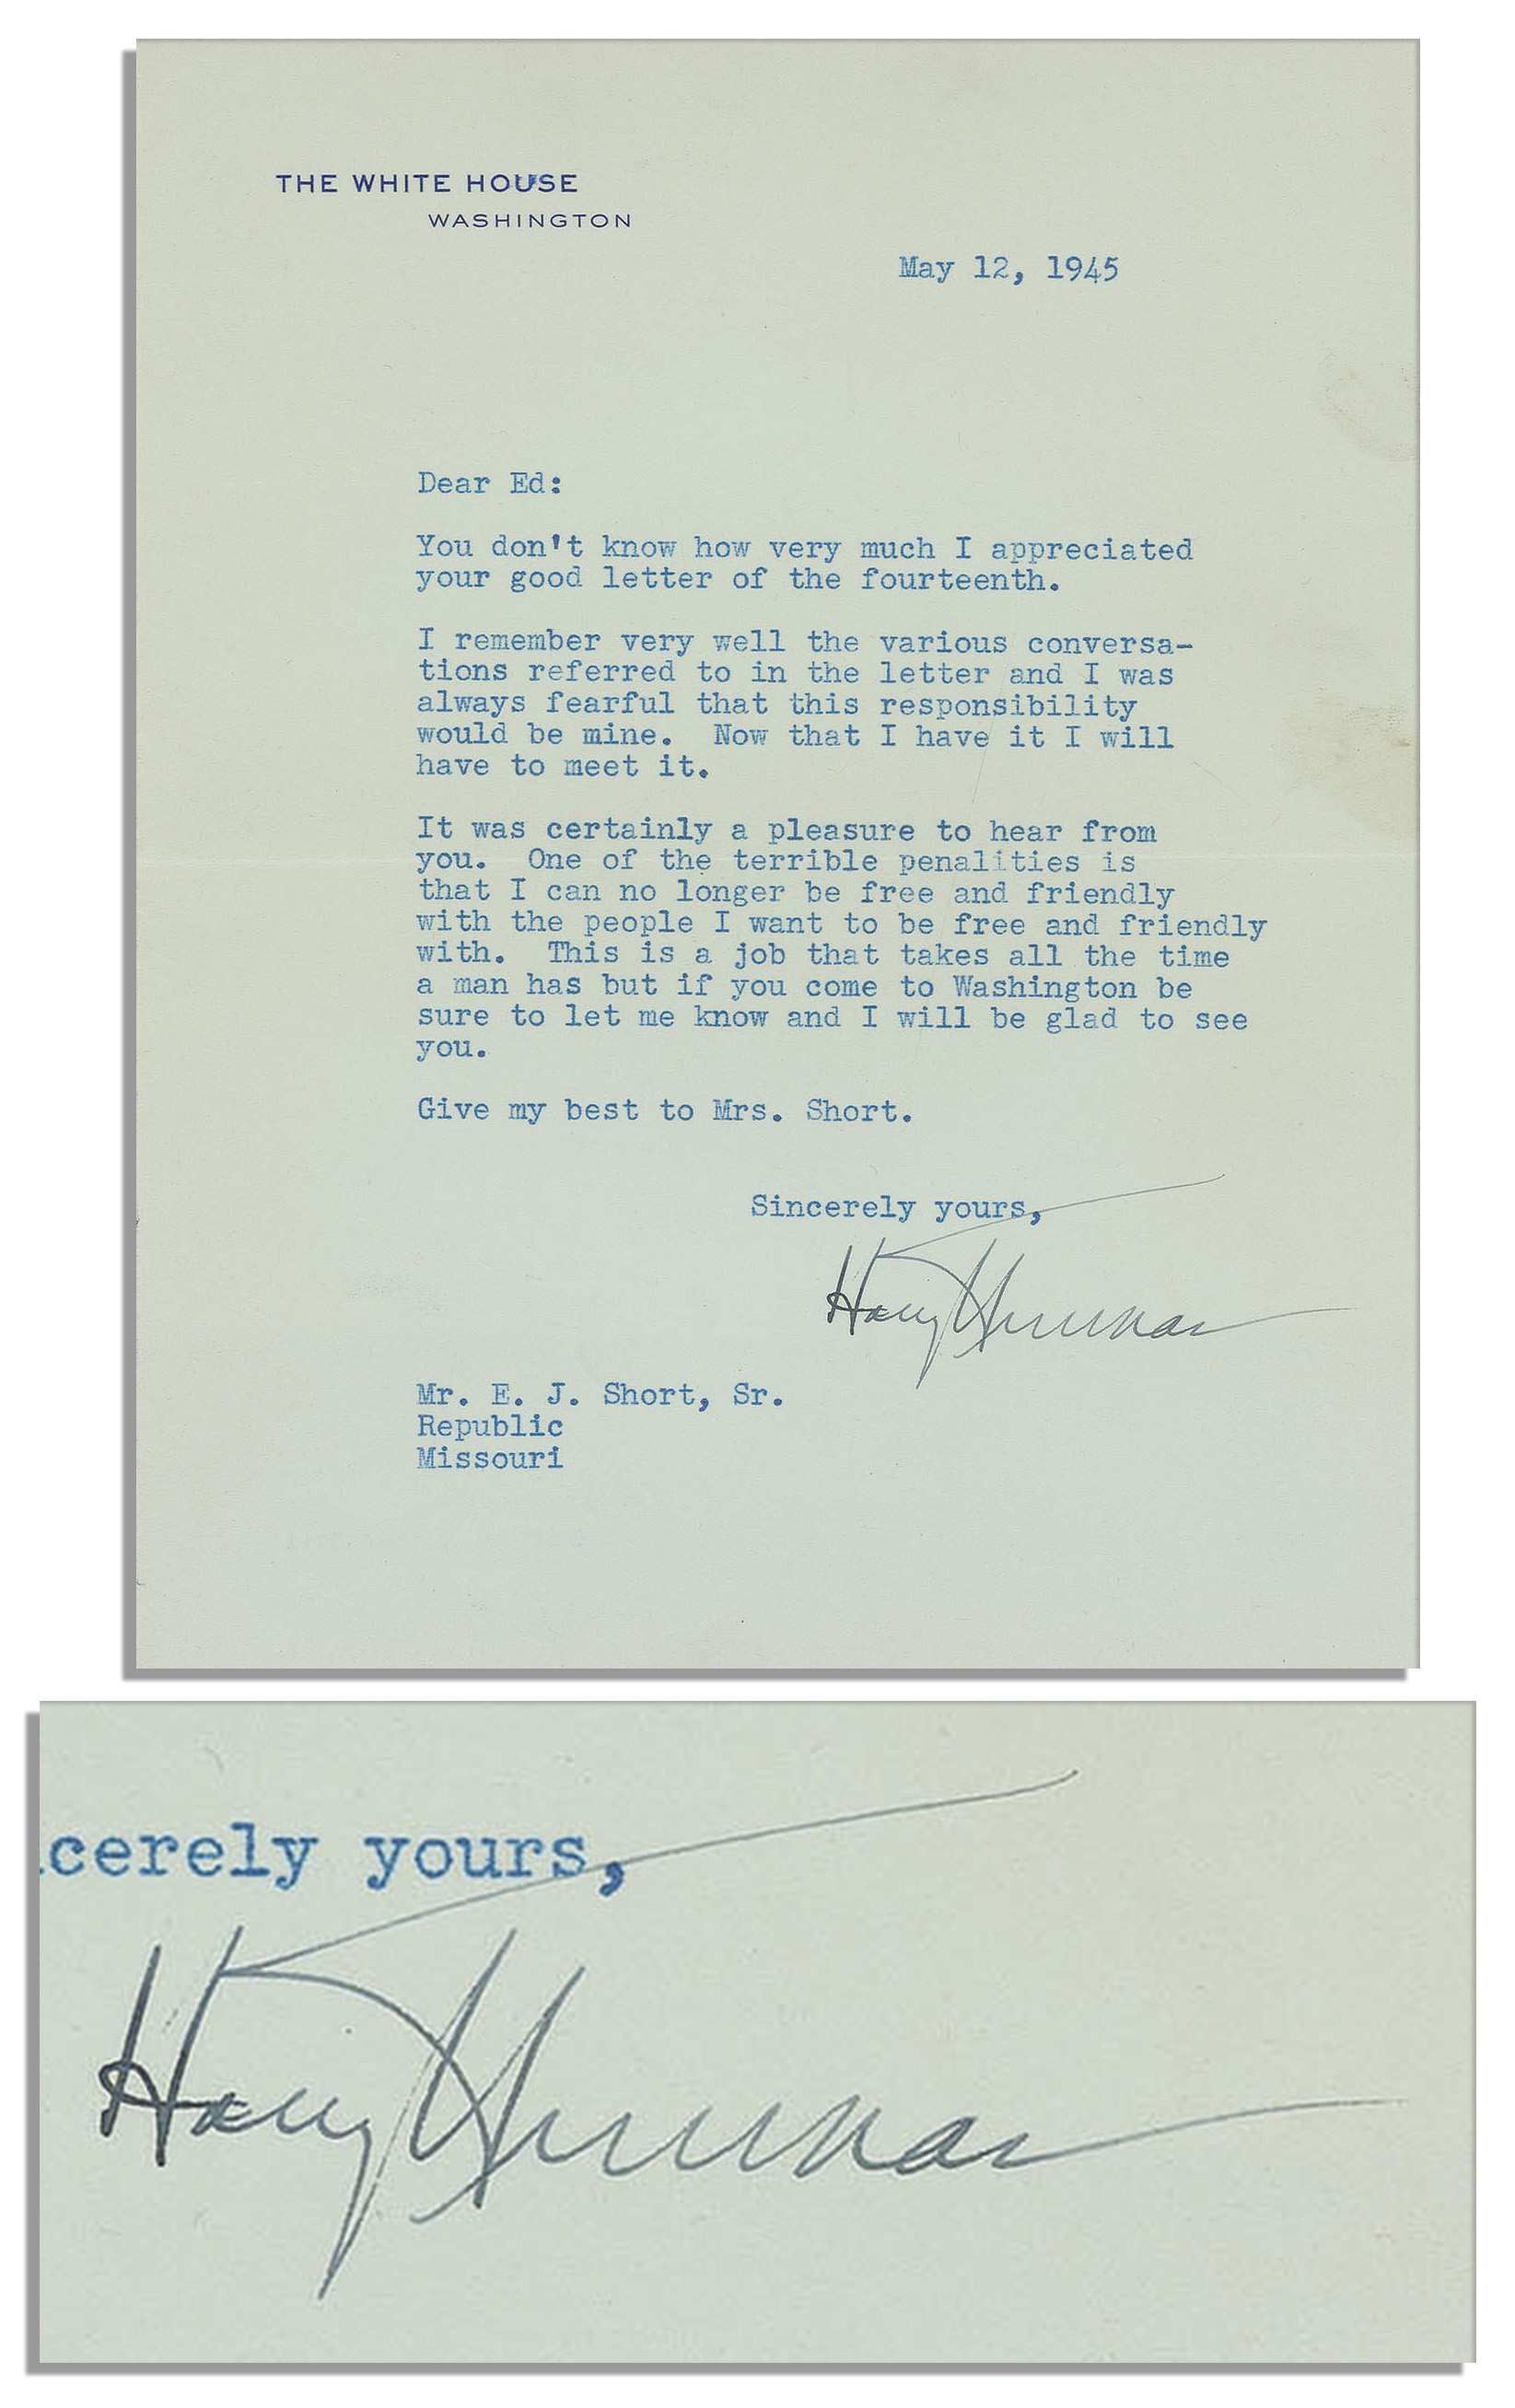 Harry Truman Memorabilia President Harry Truman Letter Signed, One Month Into His New Presidency -- ''...I was always fearful that this responsibility would be mine. Now that I have it I will have to meet it...''